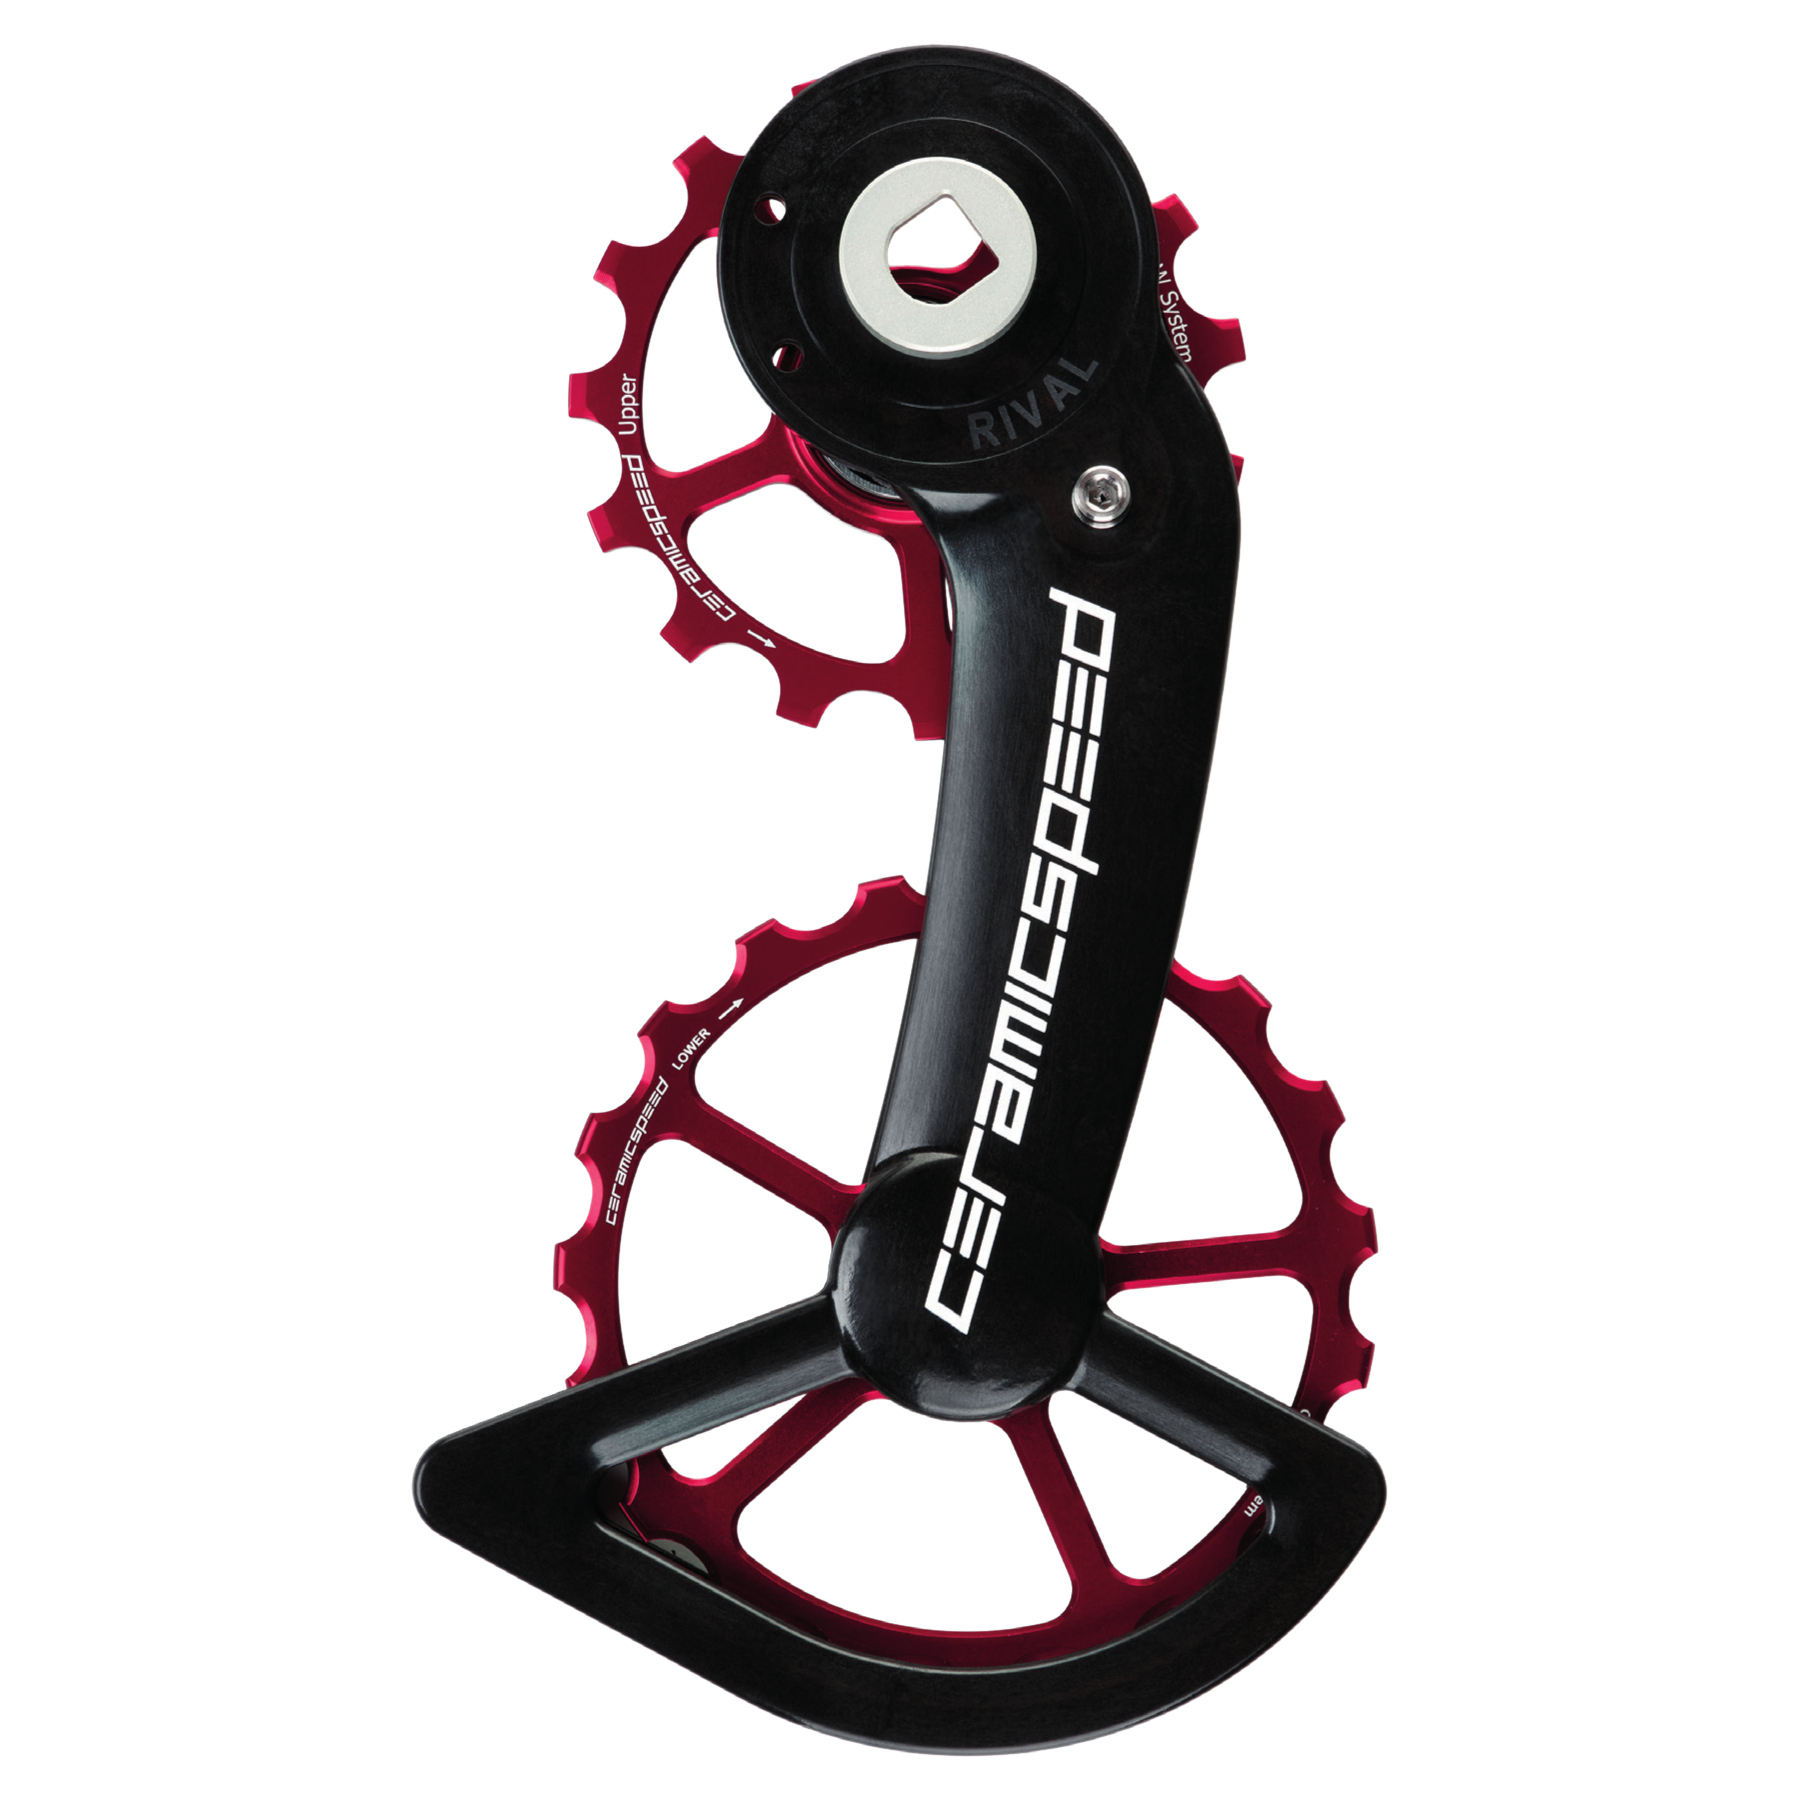 Picture of CeramicSpeed OSPW Derailleur Pulley System - for SRAM Rival AXS | 15/19 Teeth | Coated Bearings - Alternative Red